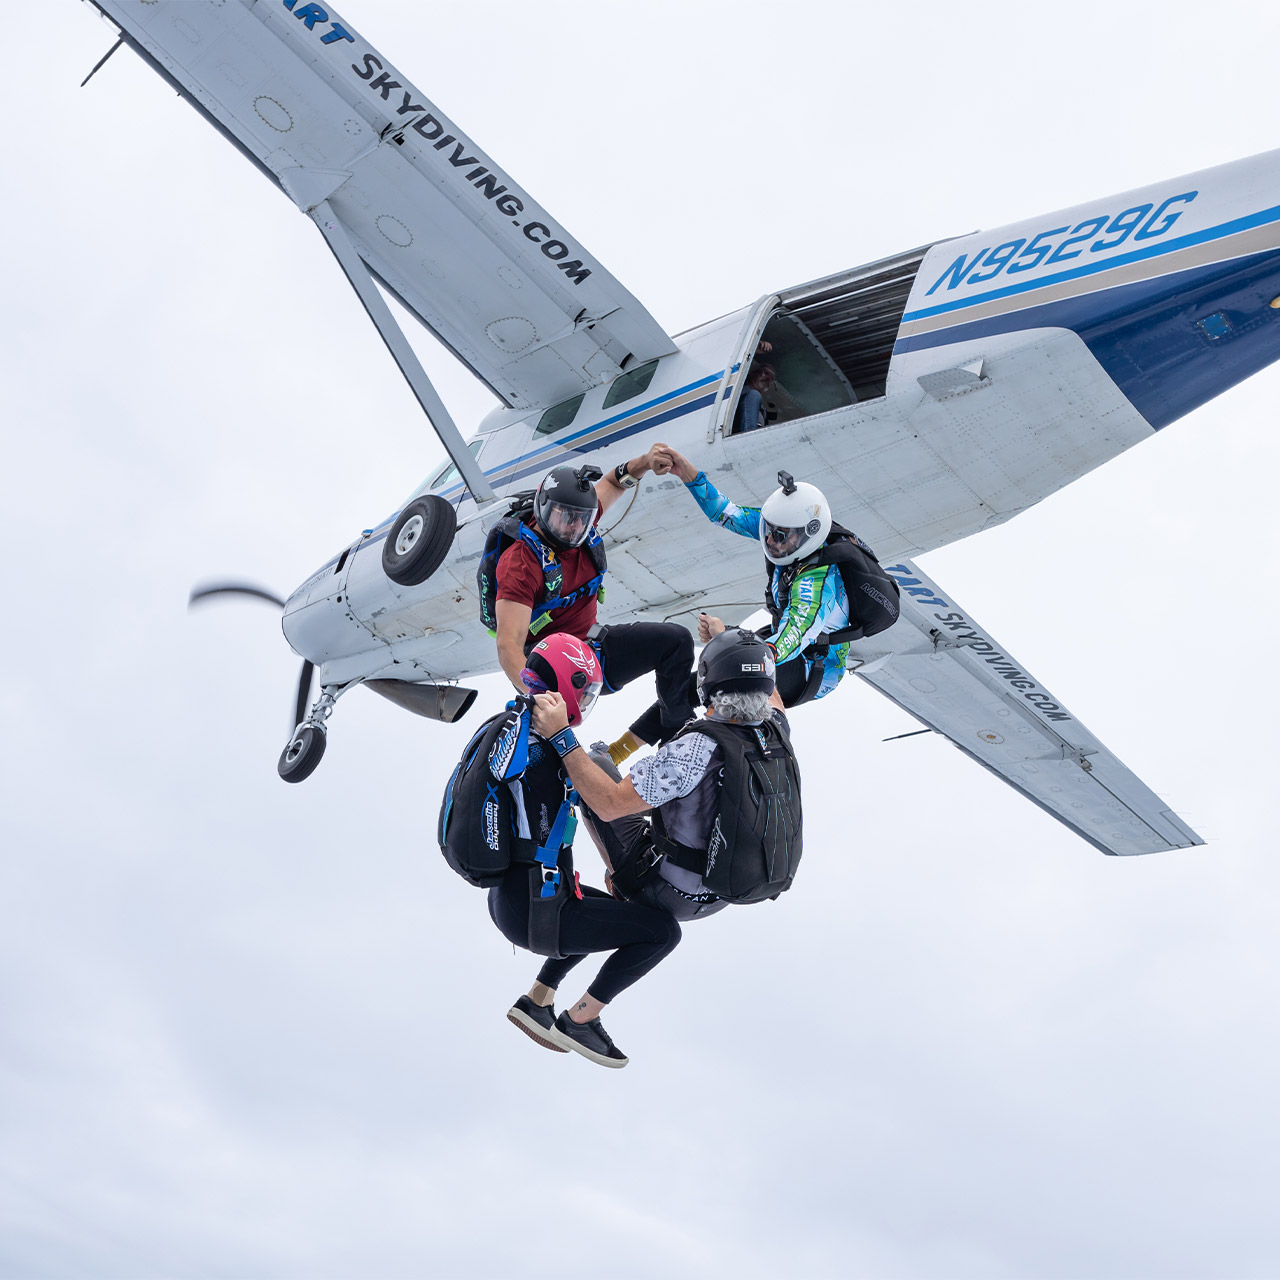 Licensed skydivers launch a head up round from the Cessna 208 Grand Caravan